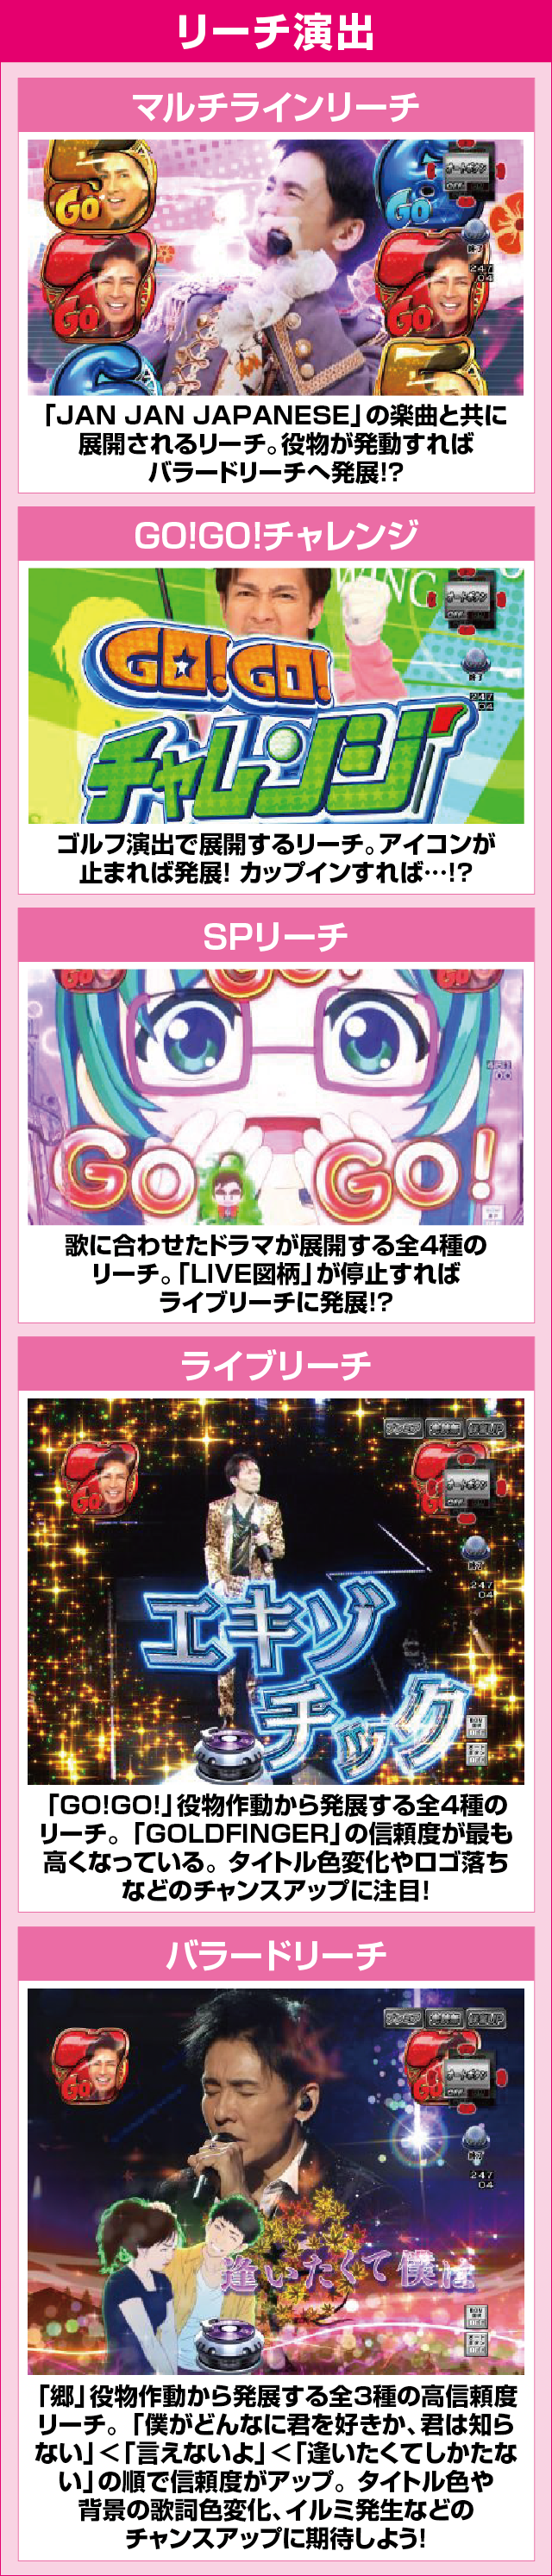 P GO!GO!郷 comeback stageのピックアップポイント